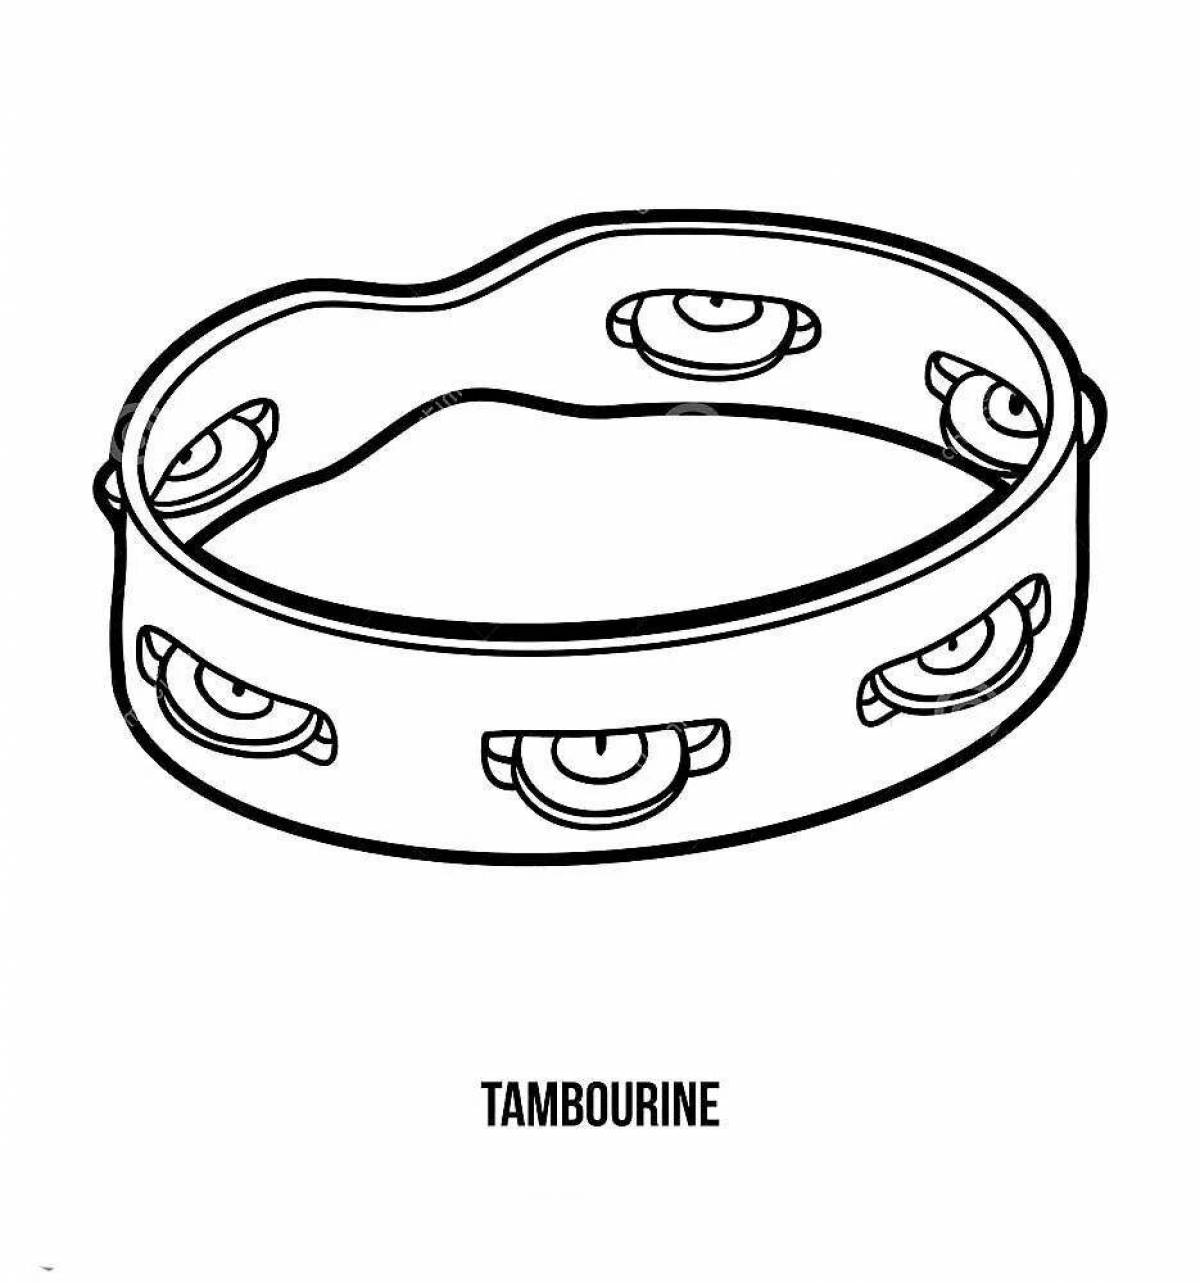 Live coloring tambourine for the little ones